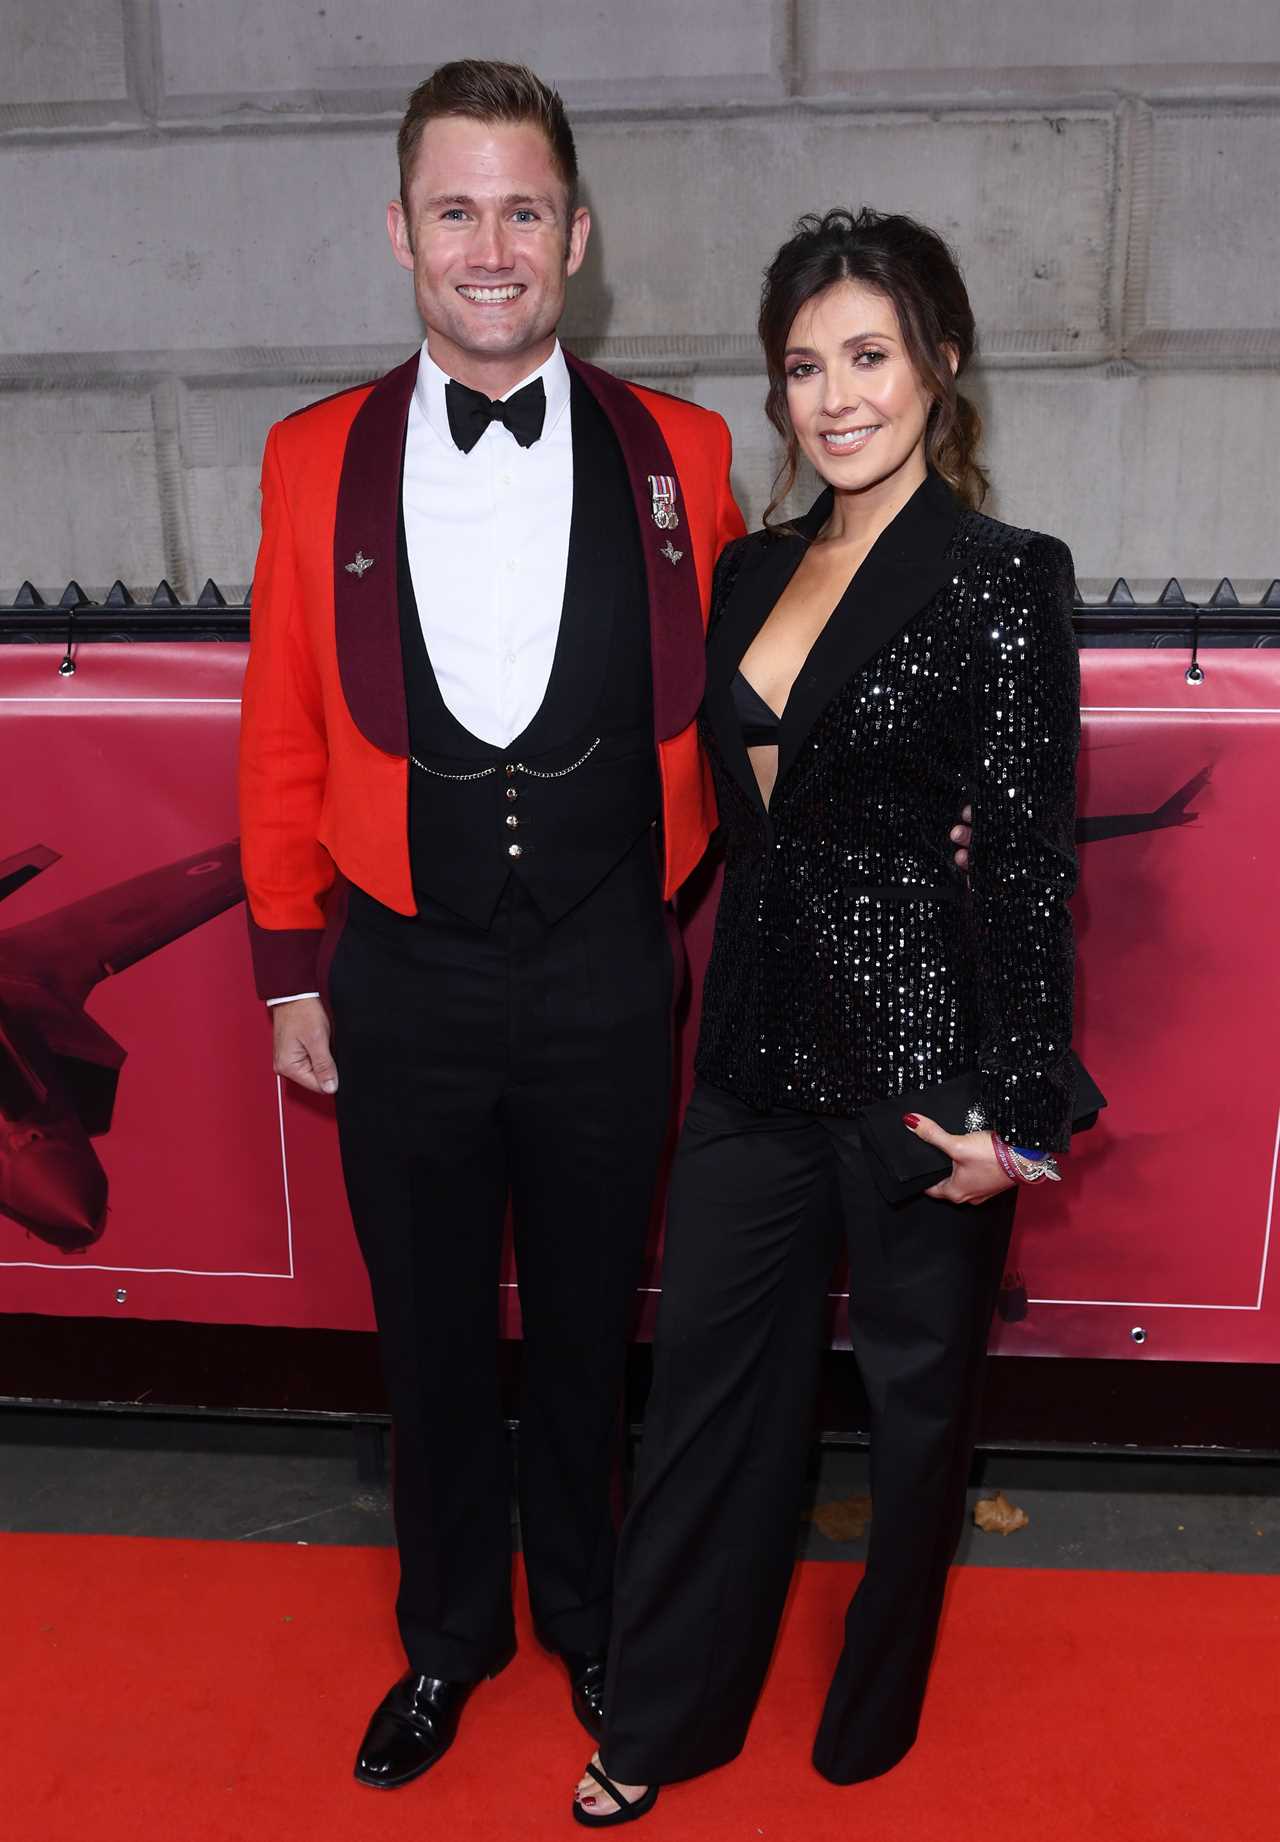 Kym Marsh’s Strictly partner Graziano is spotted for the first time since her marriage split after curse strikes again